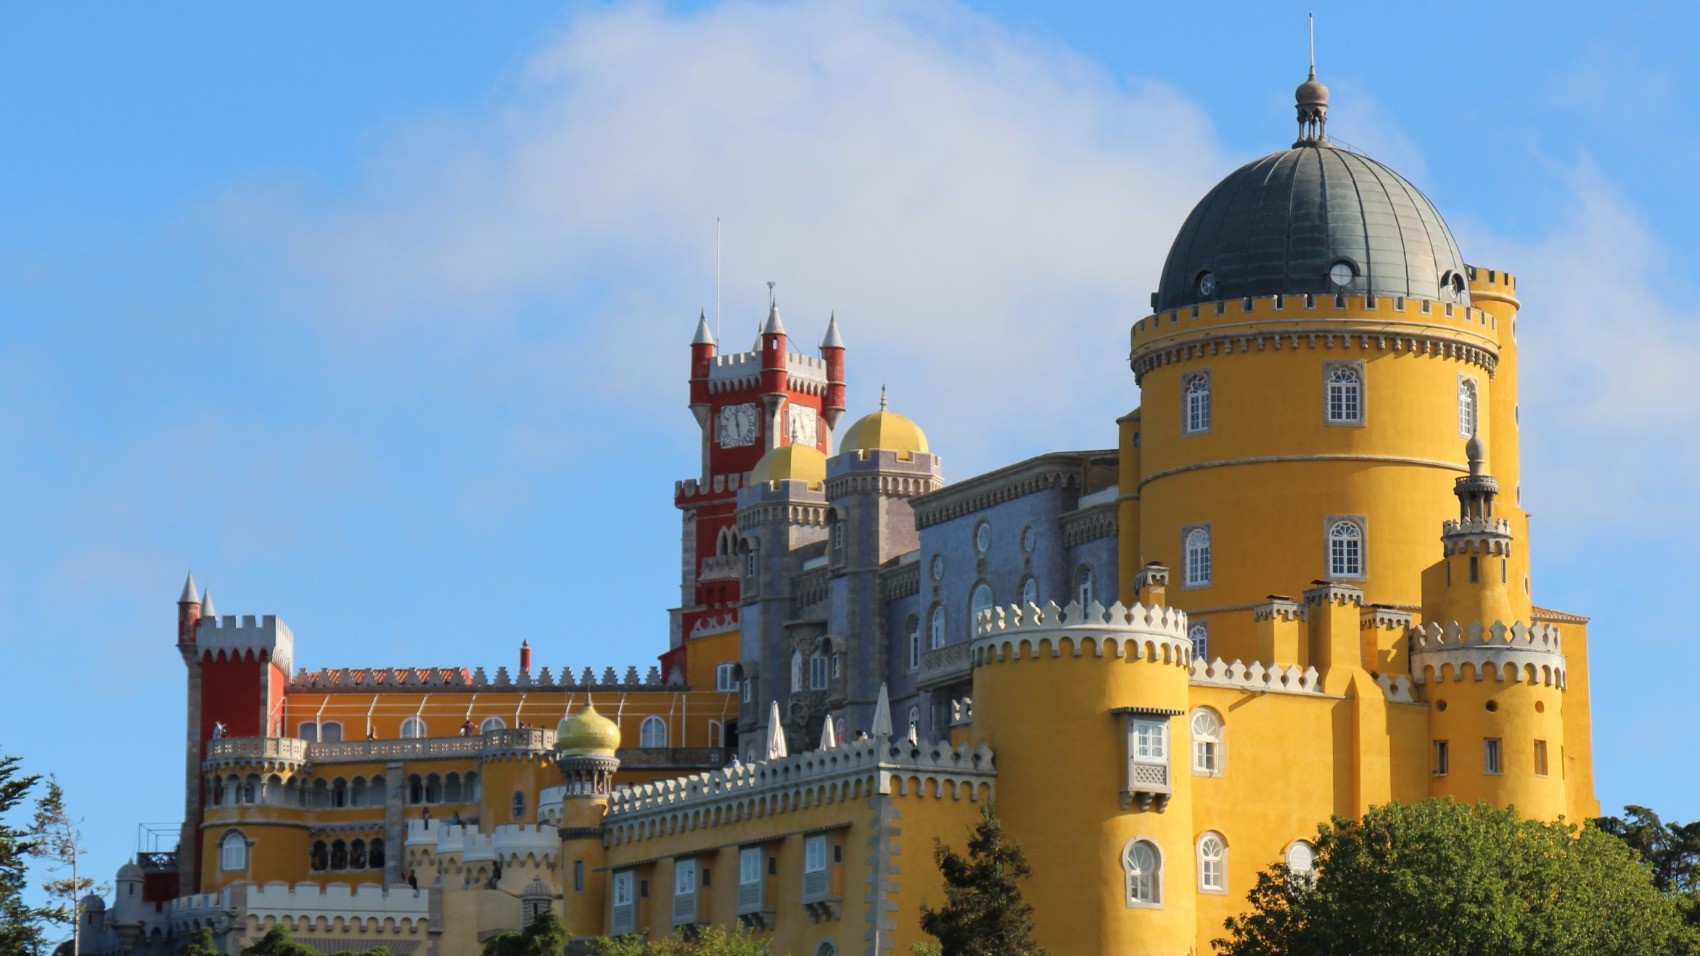 Sintra-Classic-with-Cascais-pena-palace